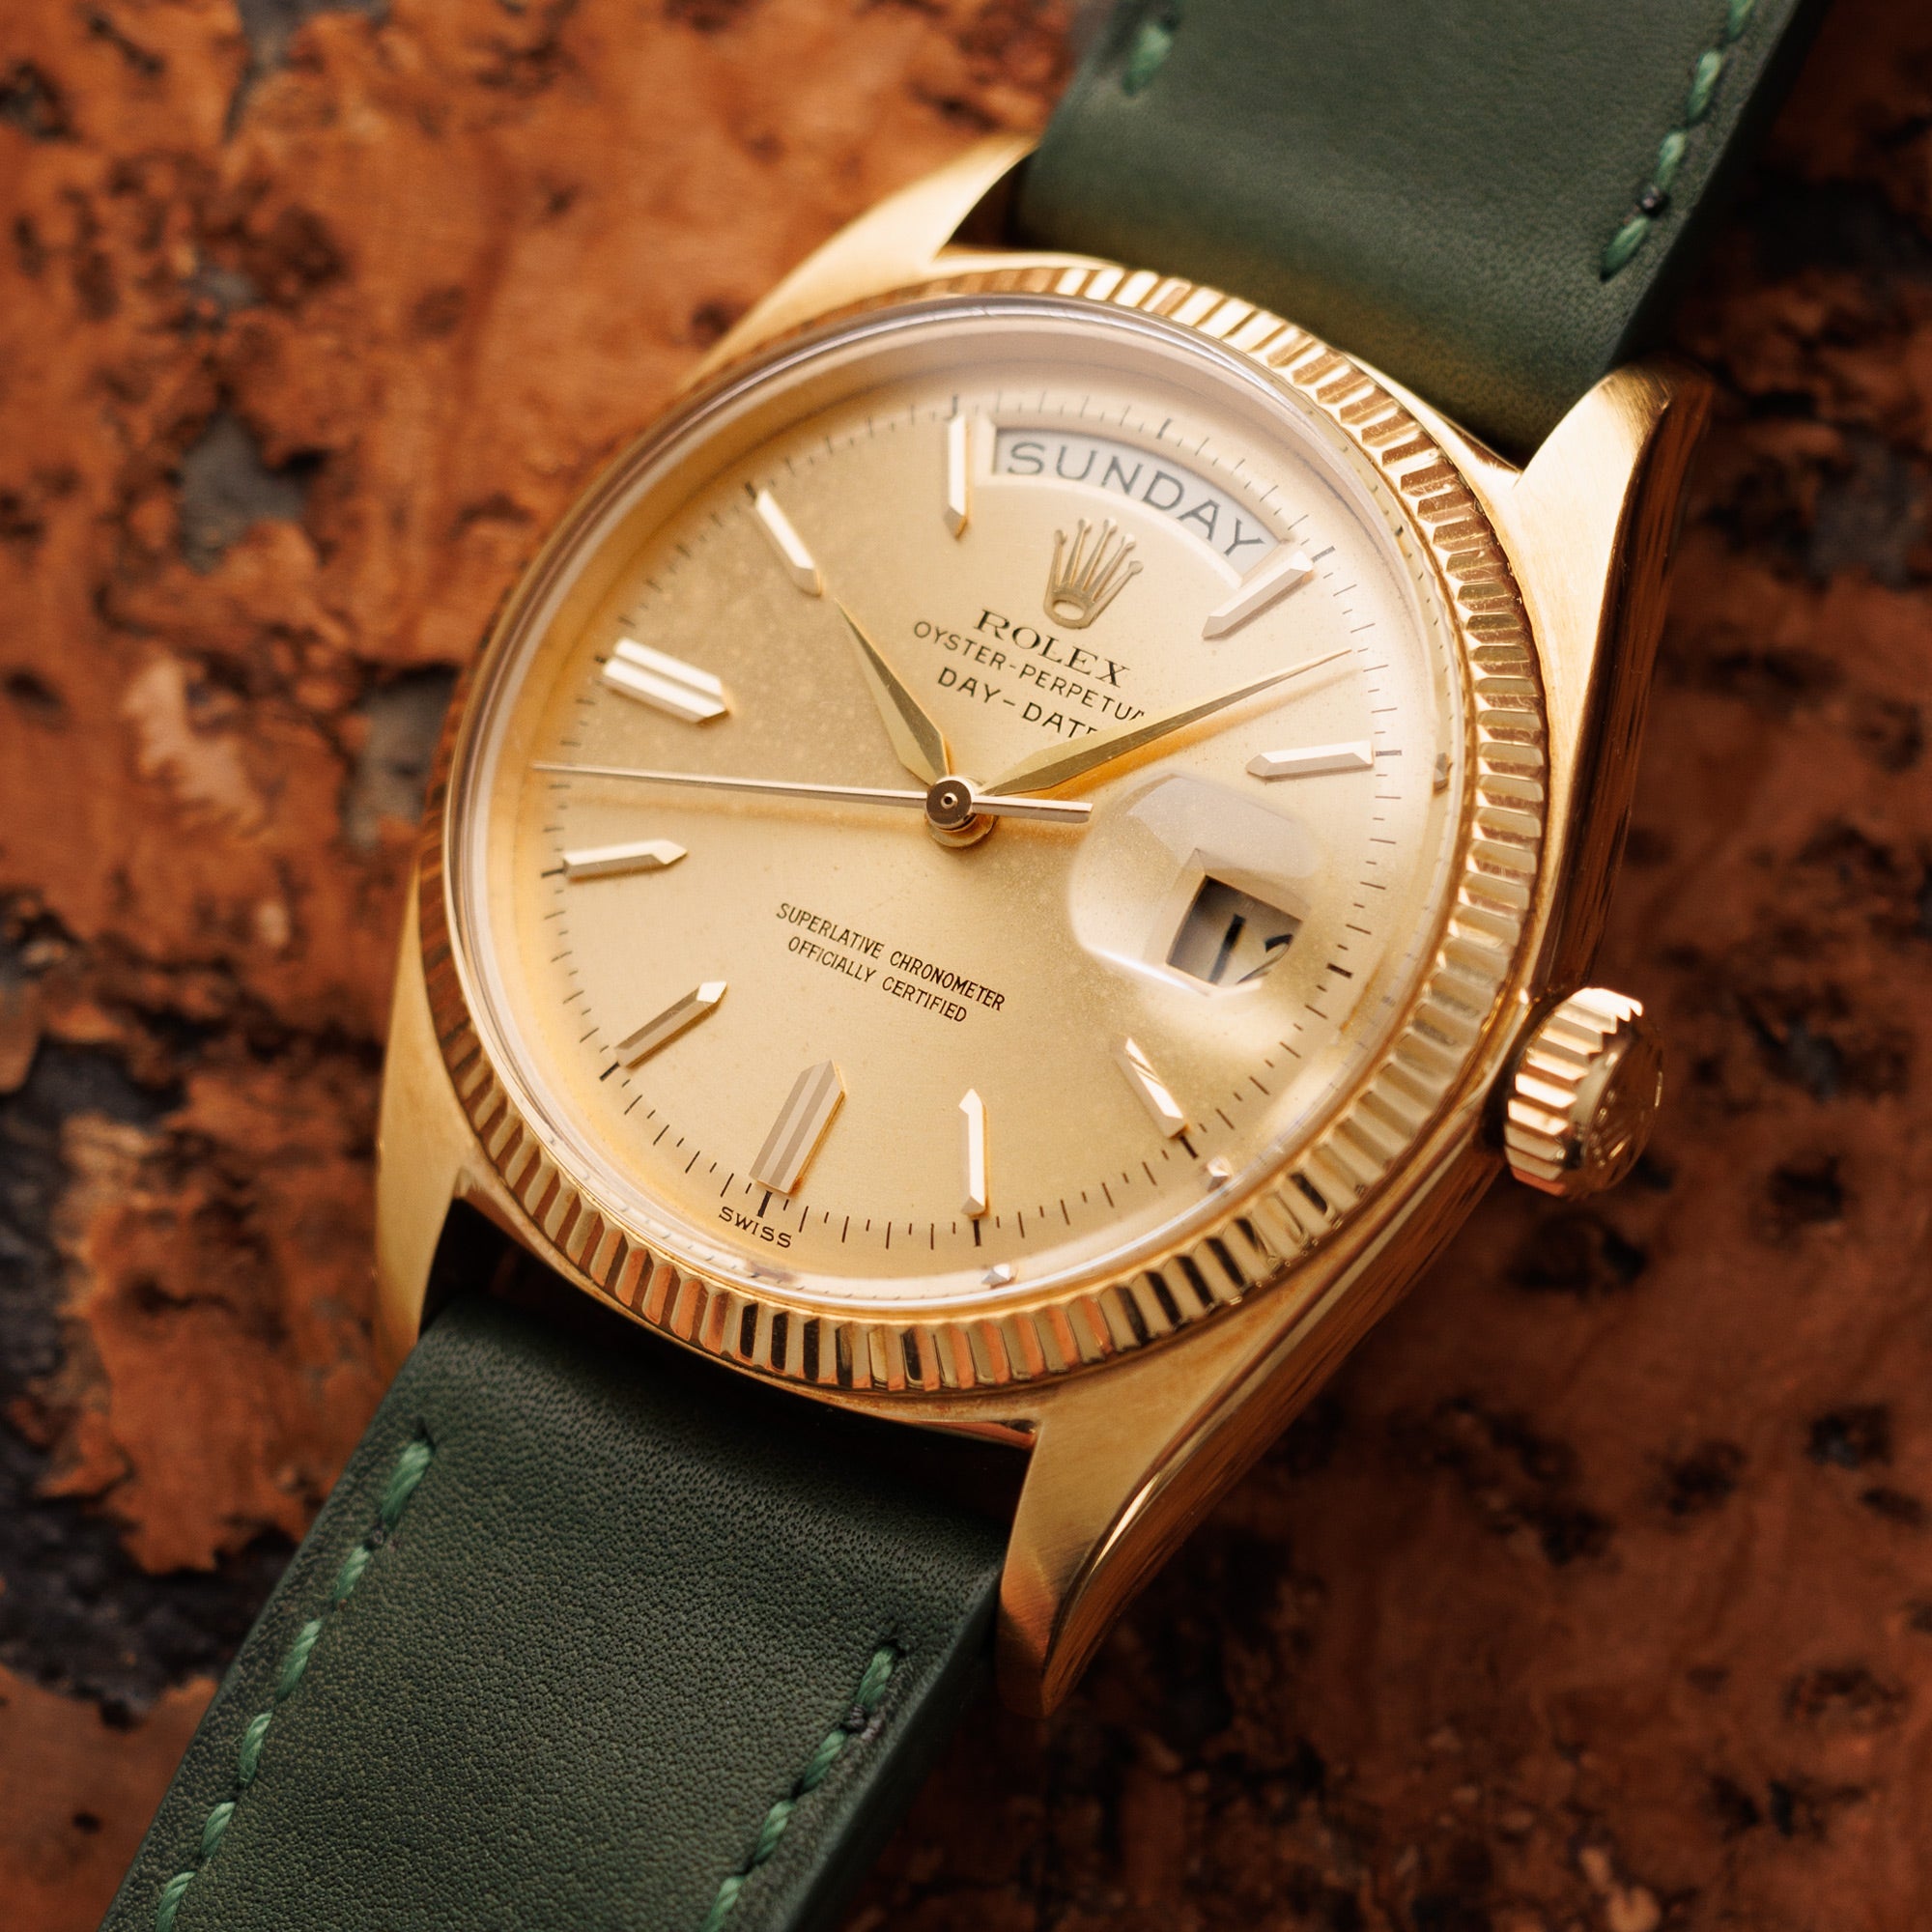 Rolex - Rolex Yellow Gold Day-Date Ref. 1803 - The Keystone Watches